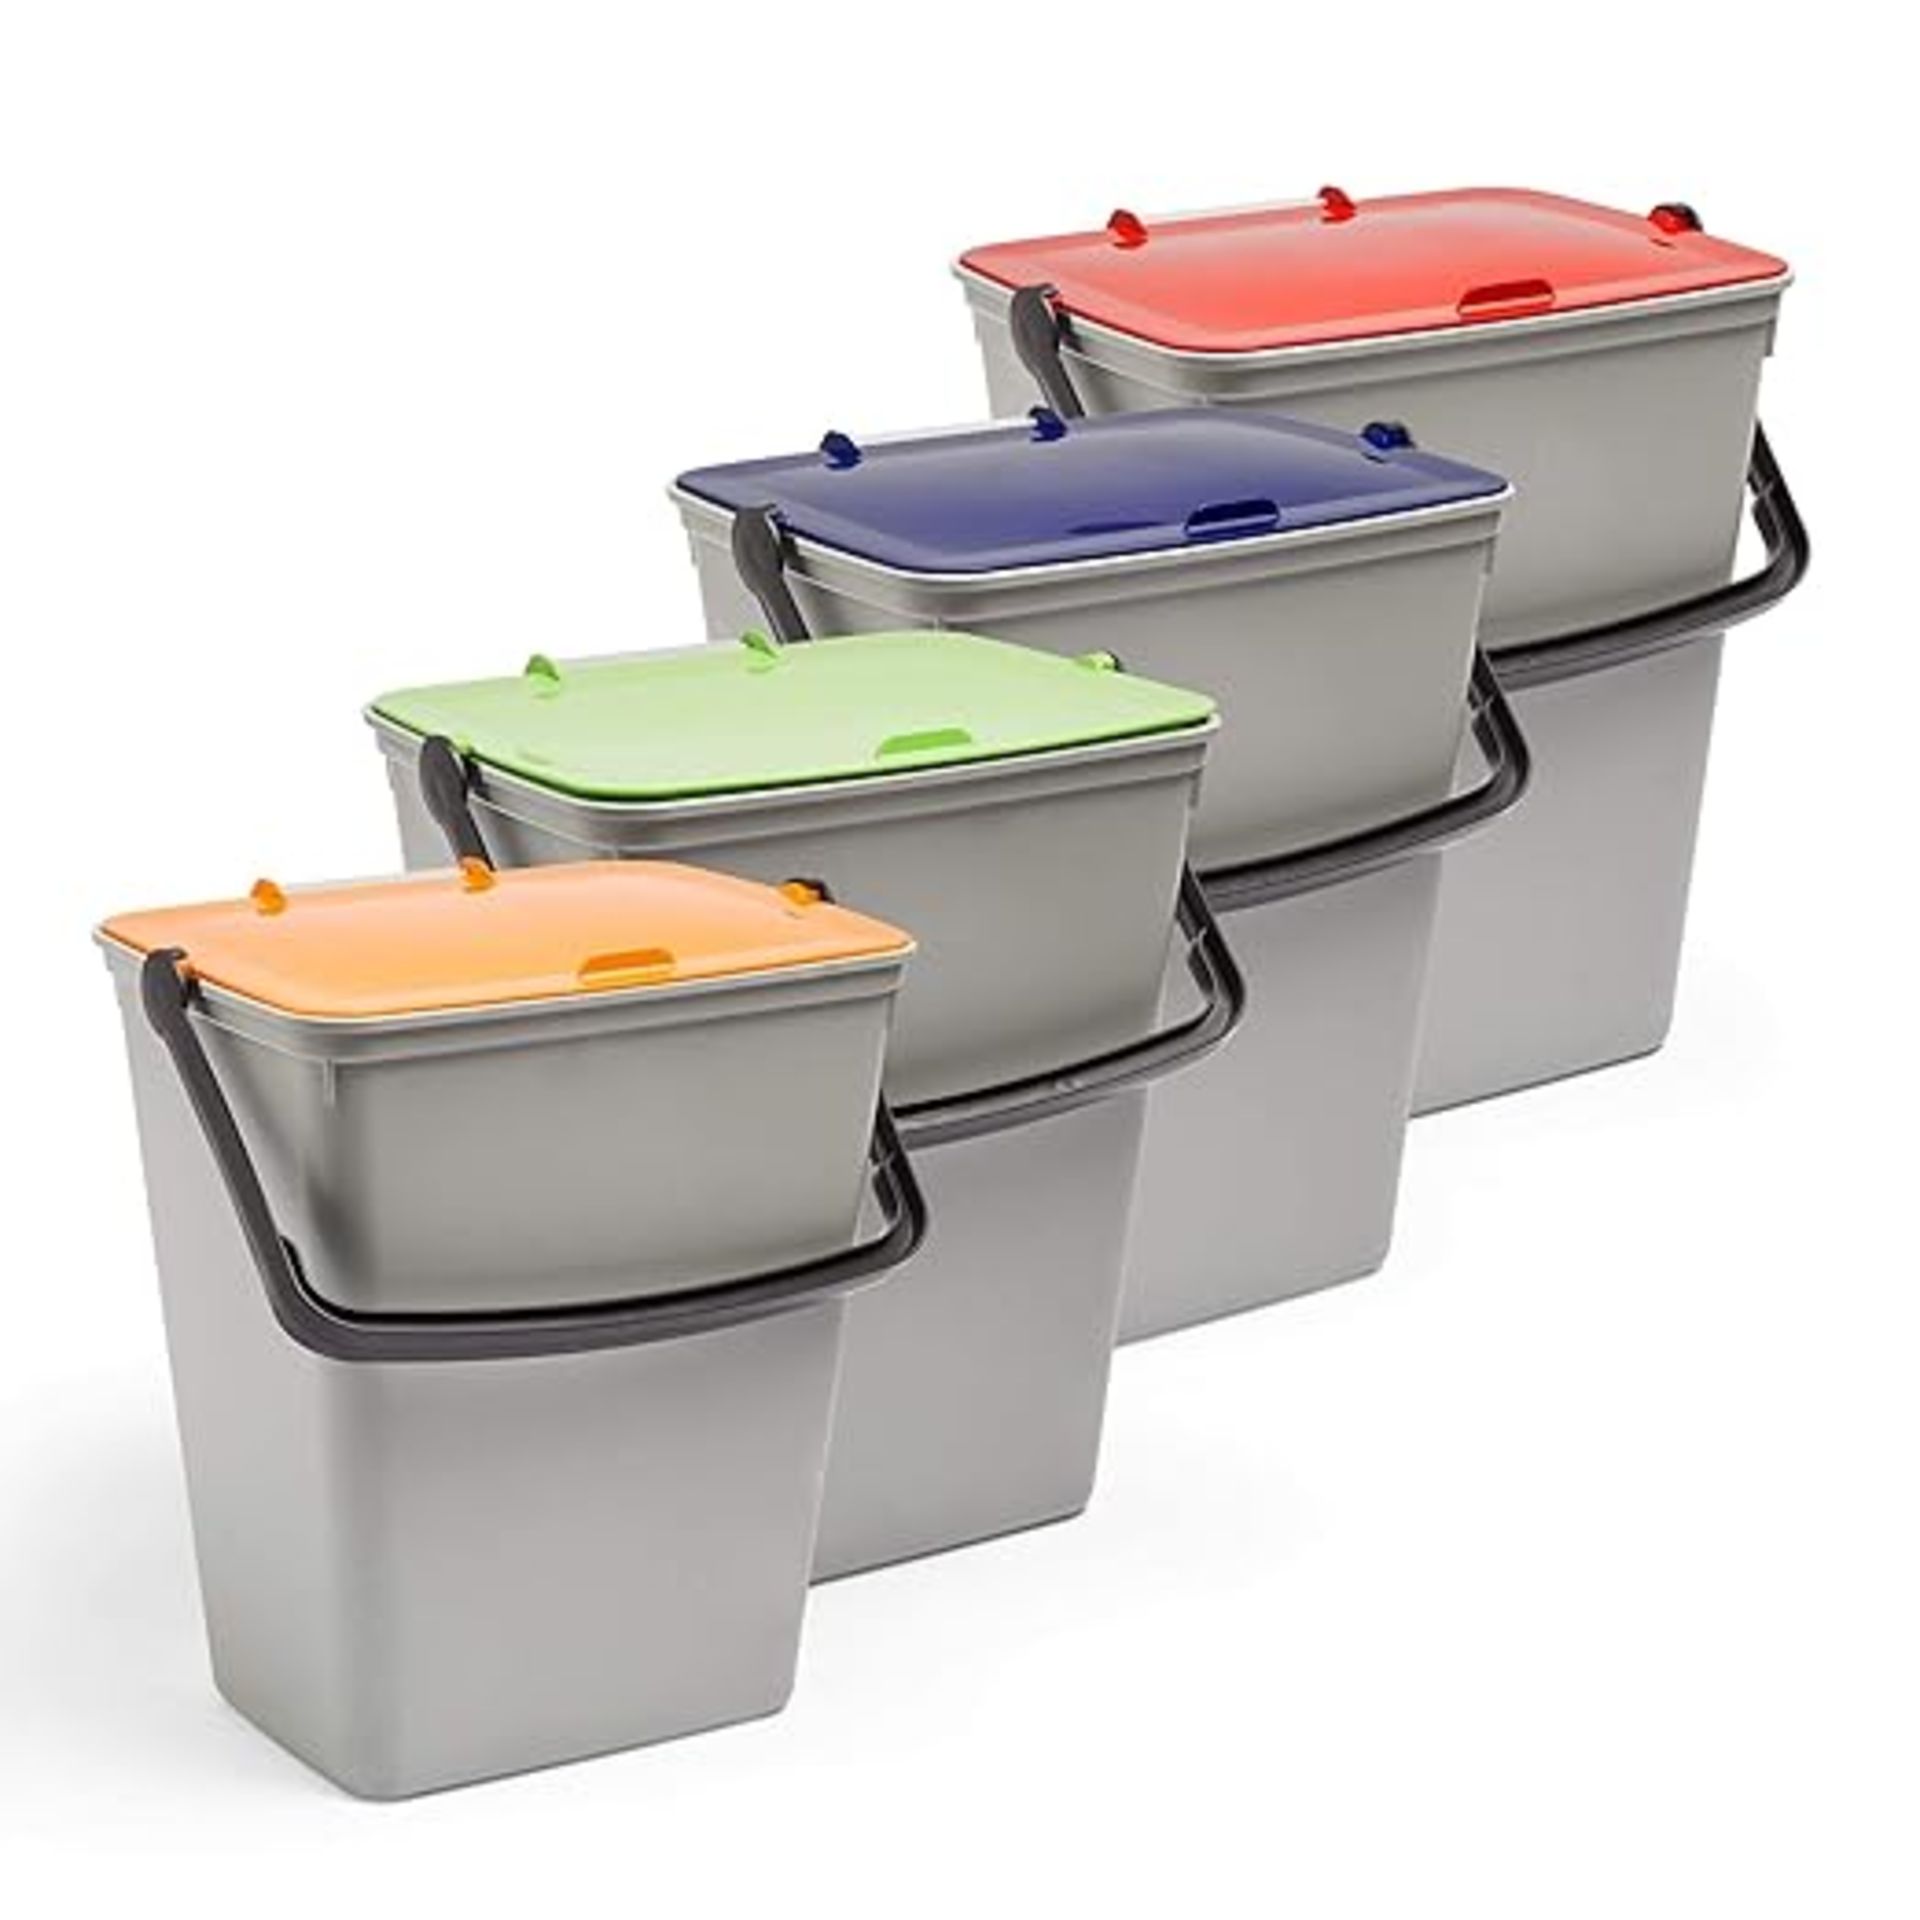 Recycling Bins for Kitchen Set of Four, 4 x 15L Colour-Coded Waste & Recycle Bins w/Handle &